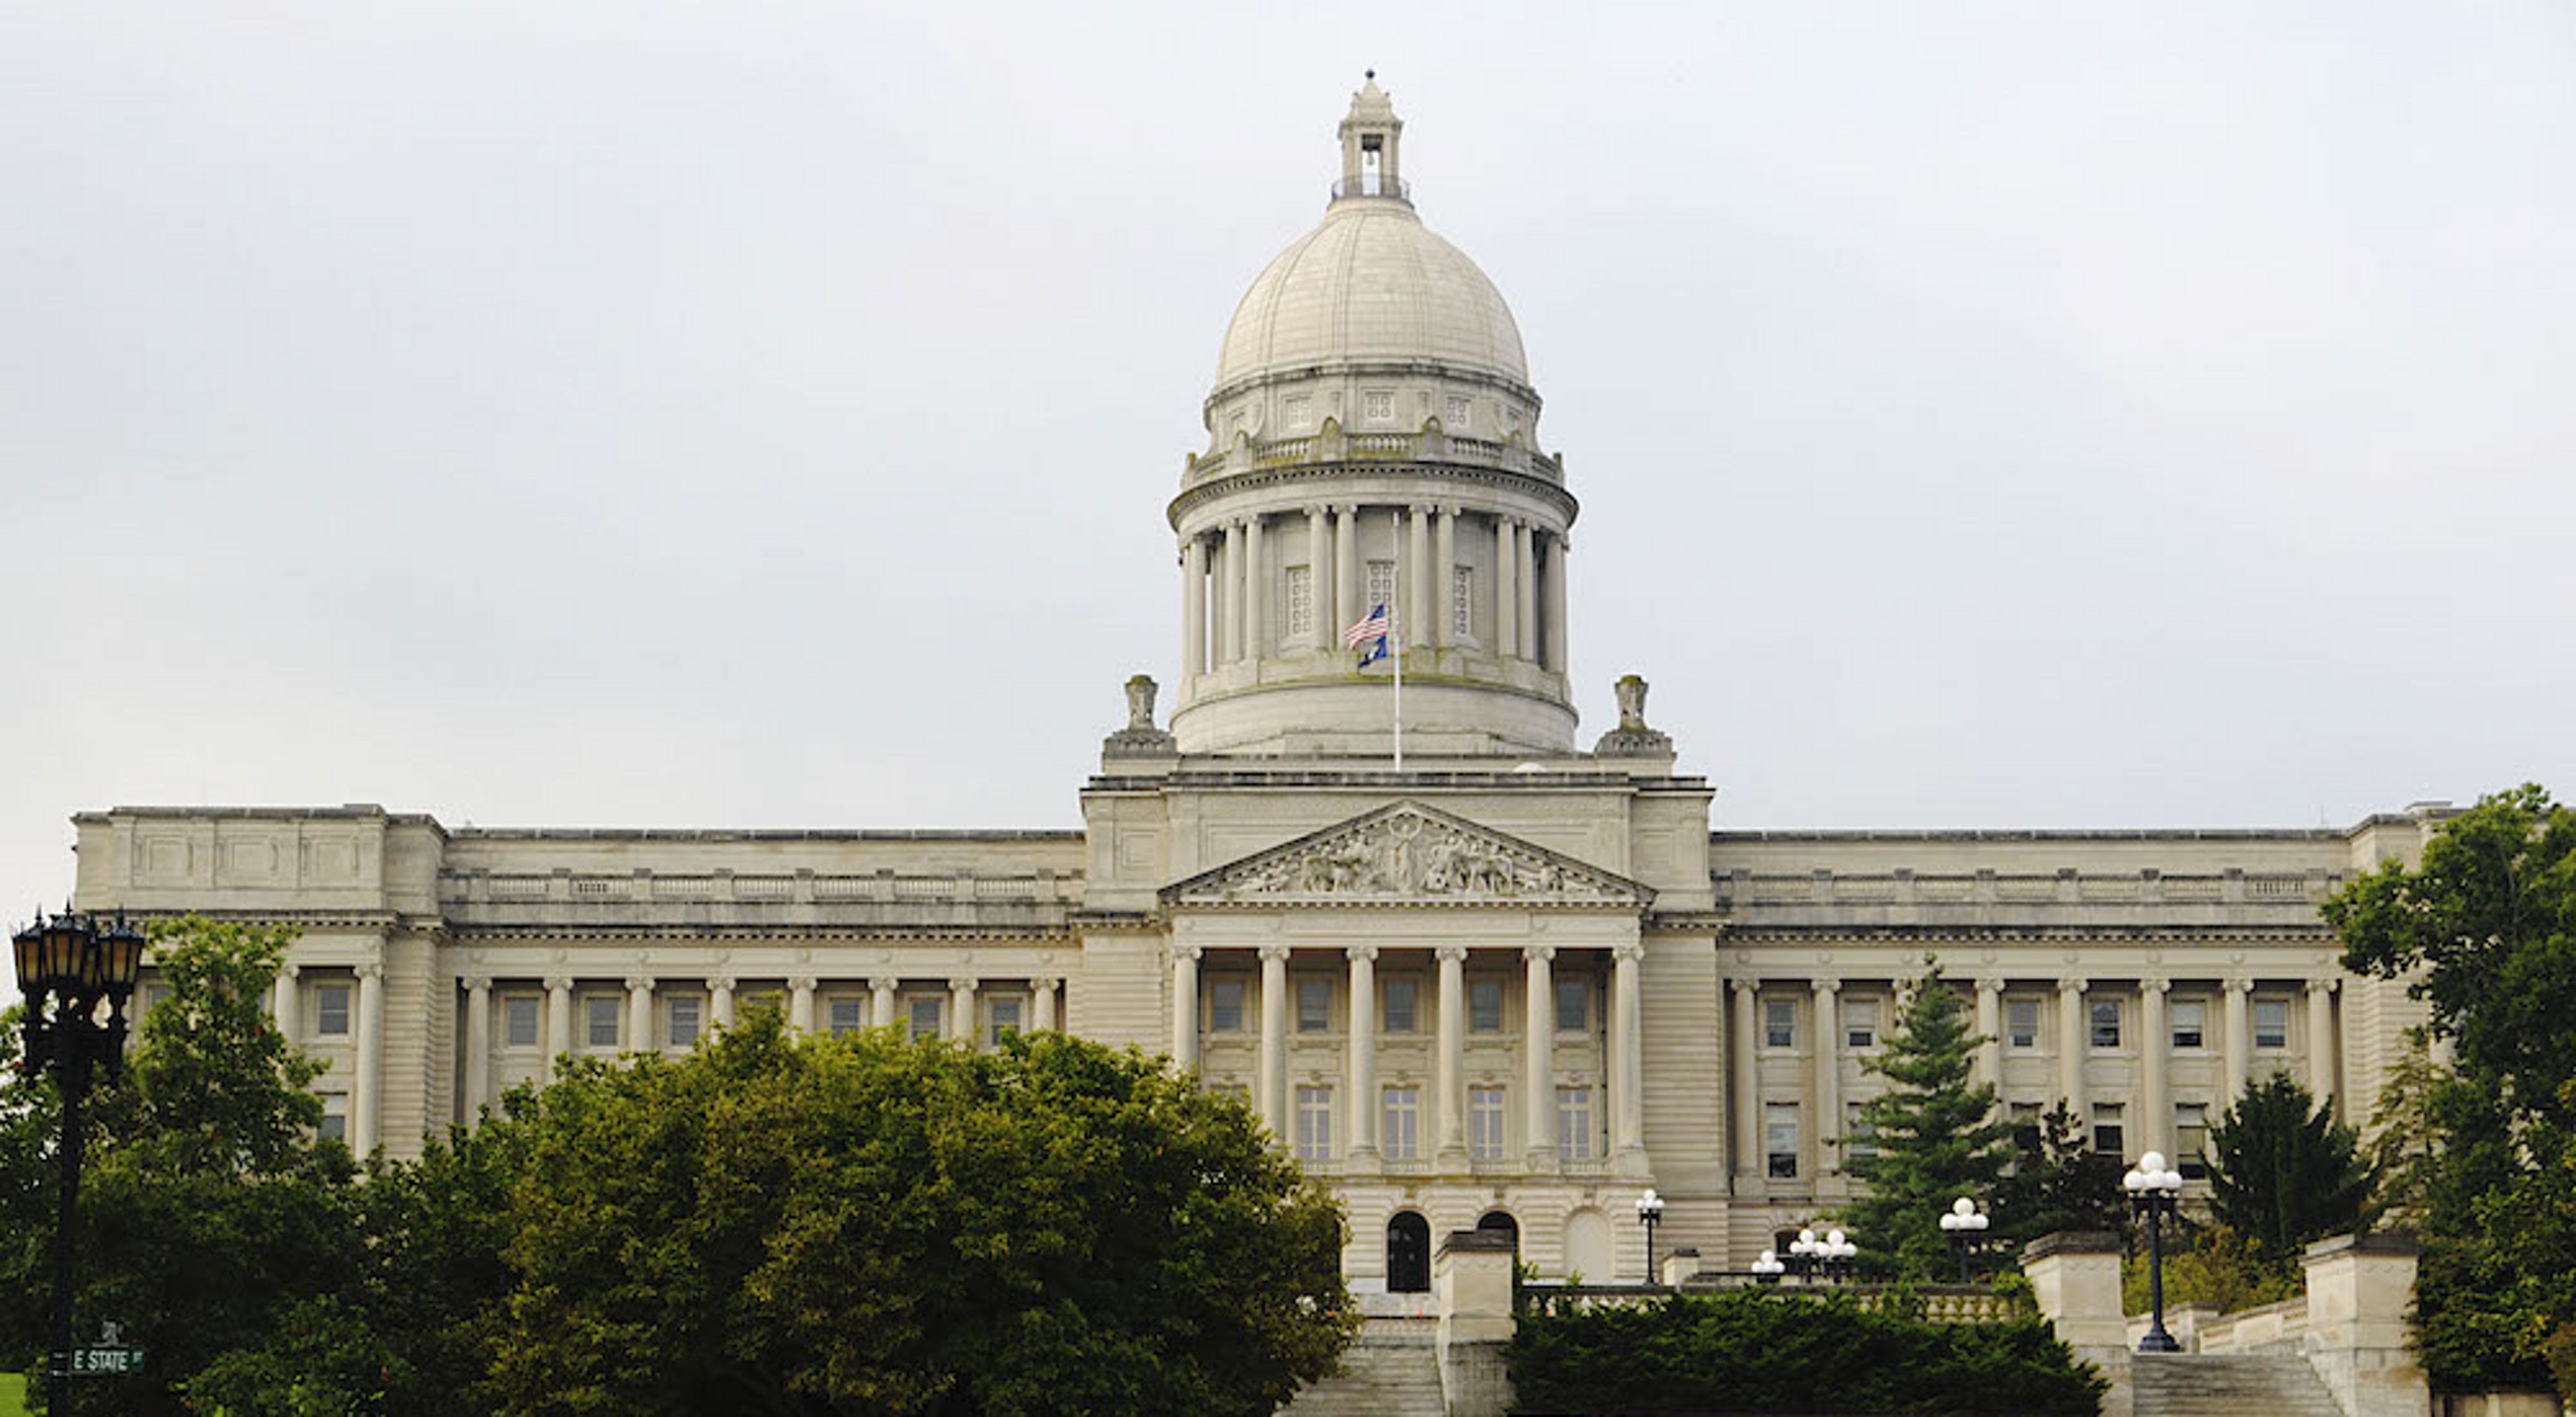 The Kentucky State Capital building on a clear day.